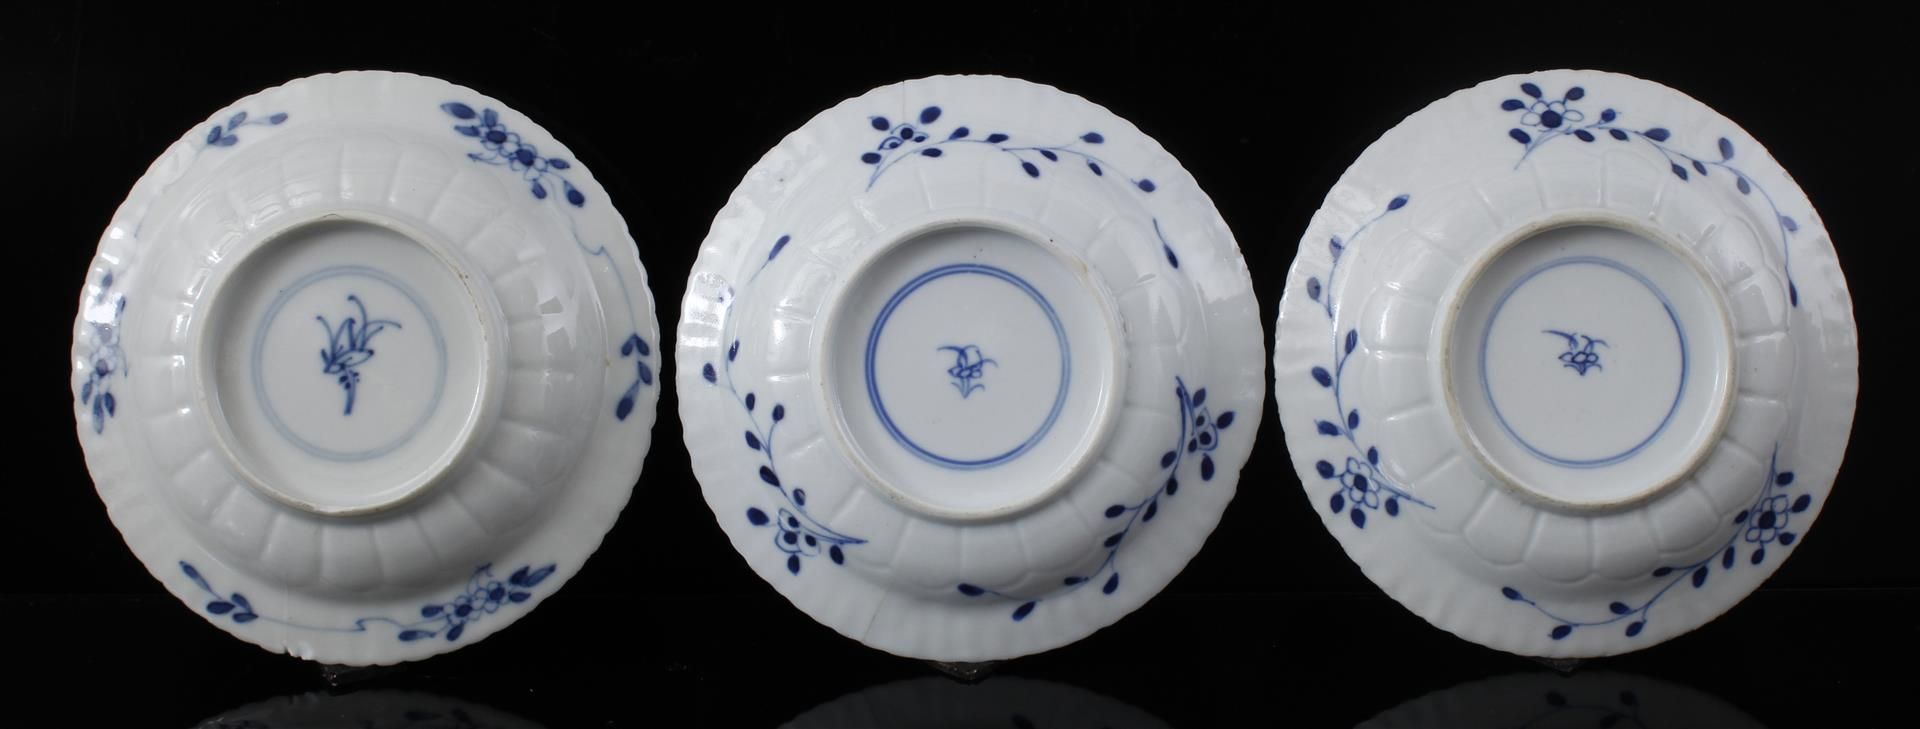 4 porcelain cups and 3 saucers, 19th century - Image 4 of 5